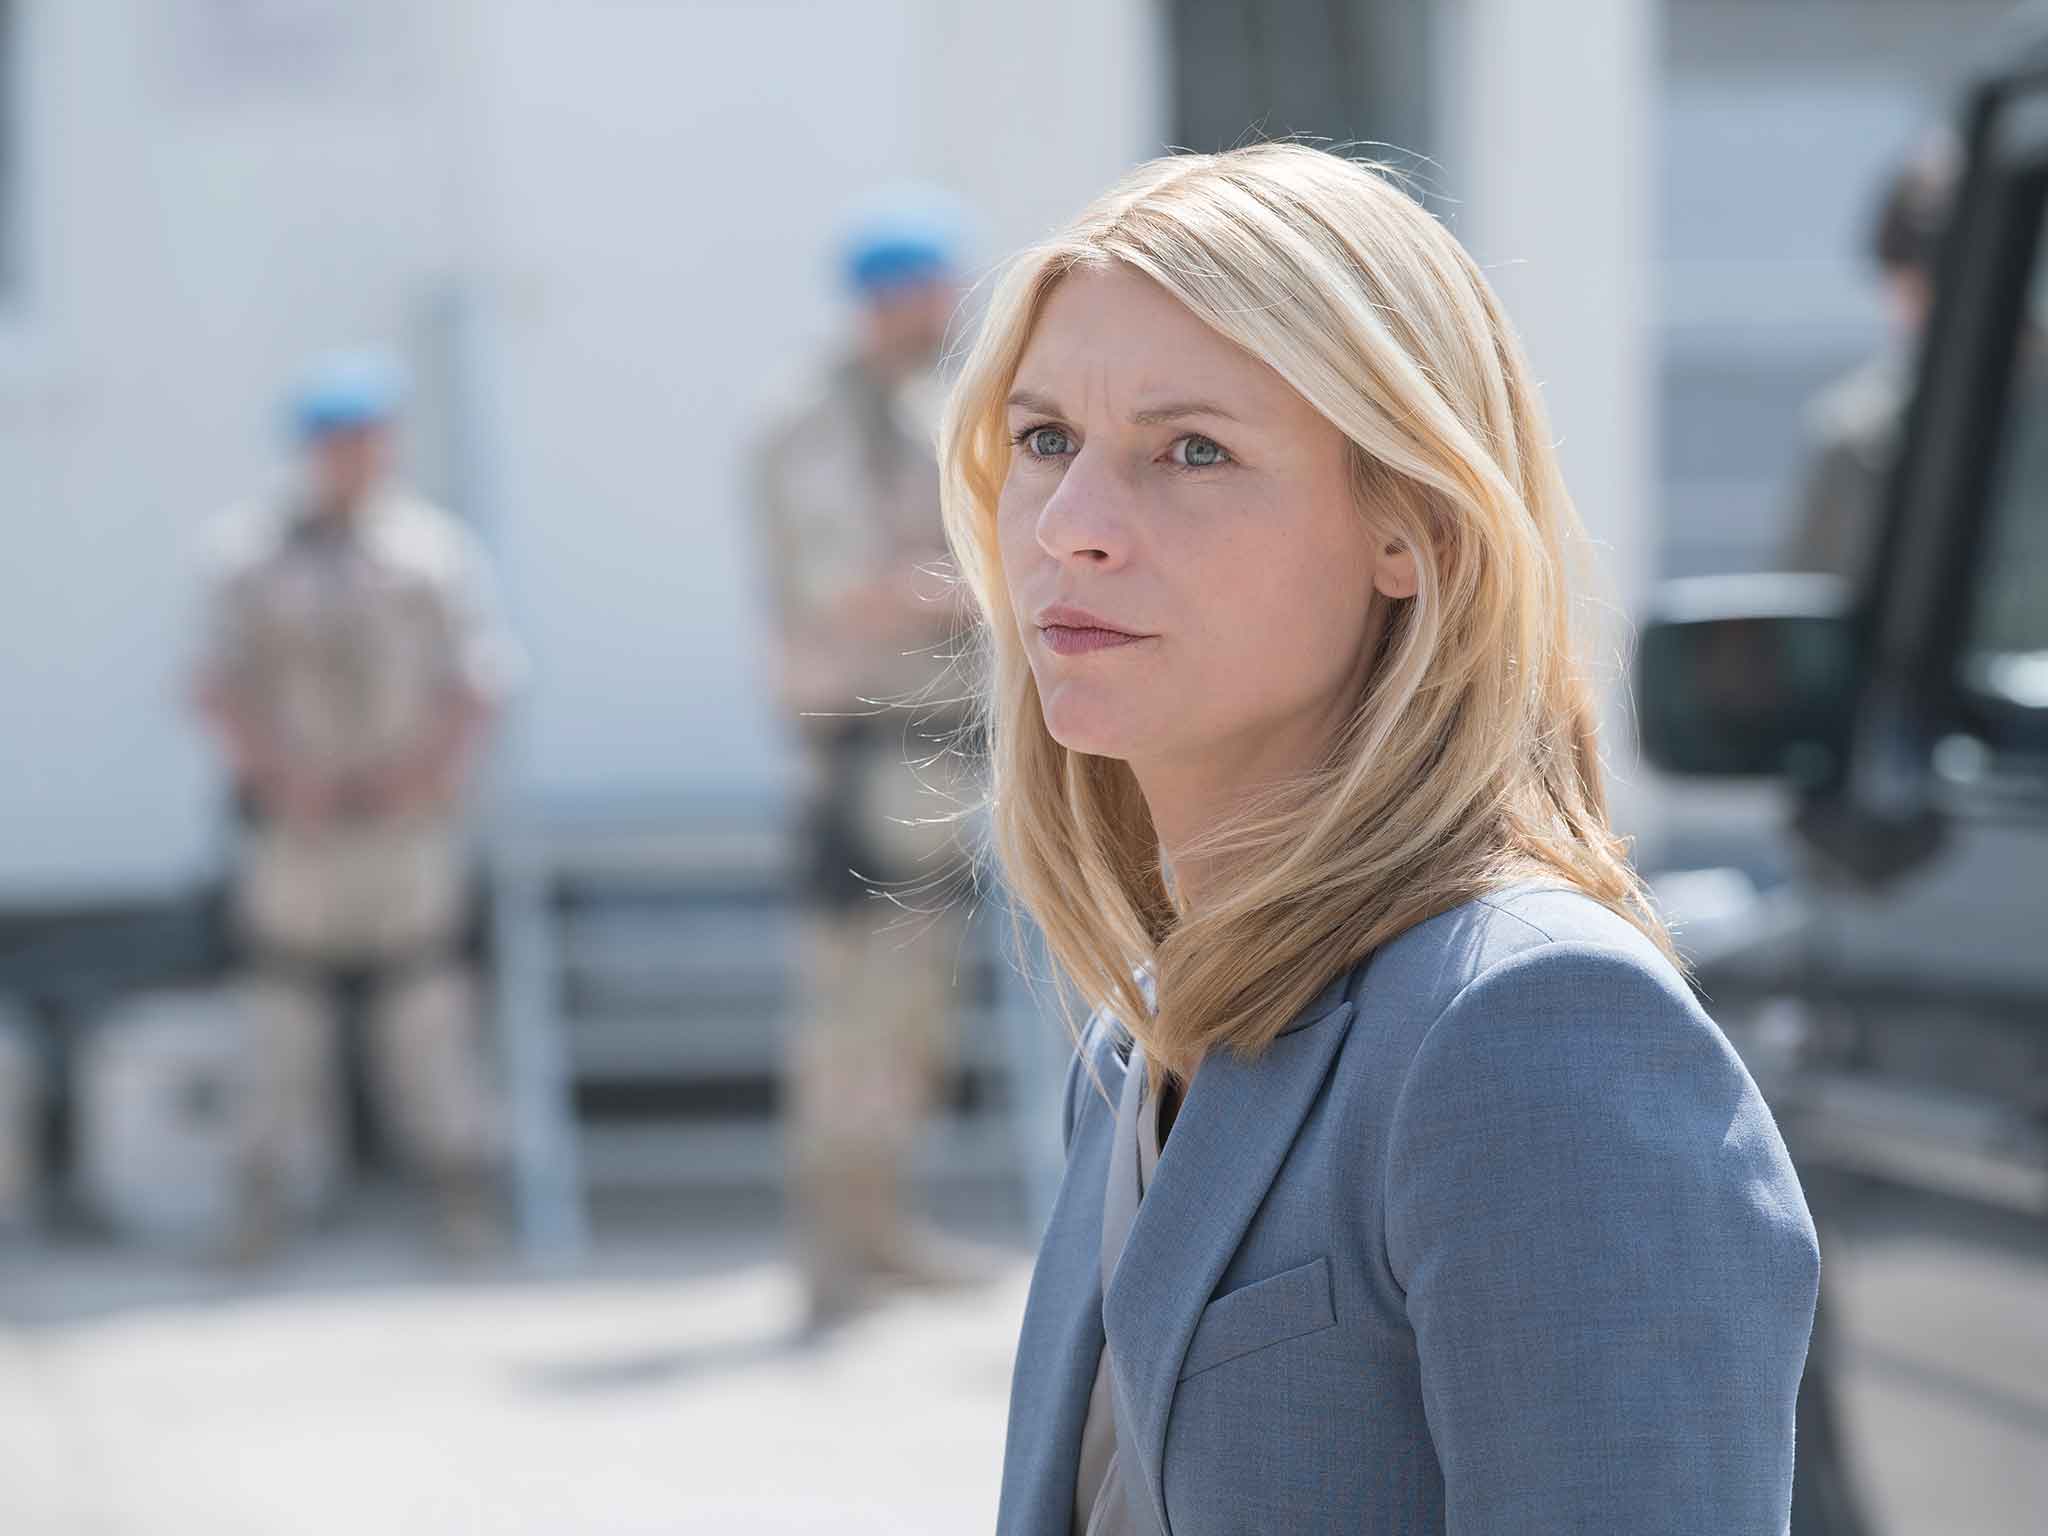 Claire Danes returns as Carrie Mathison in the explosive ‘Homeland’